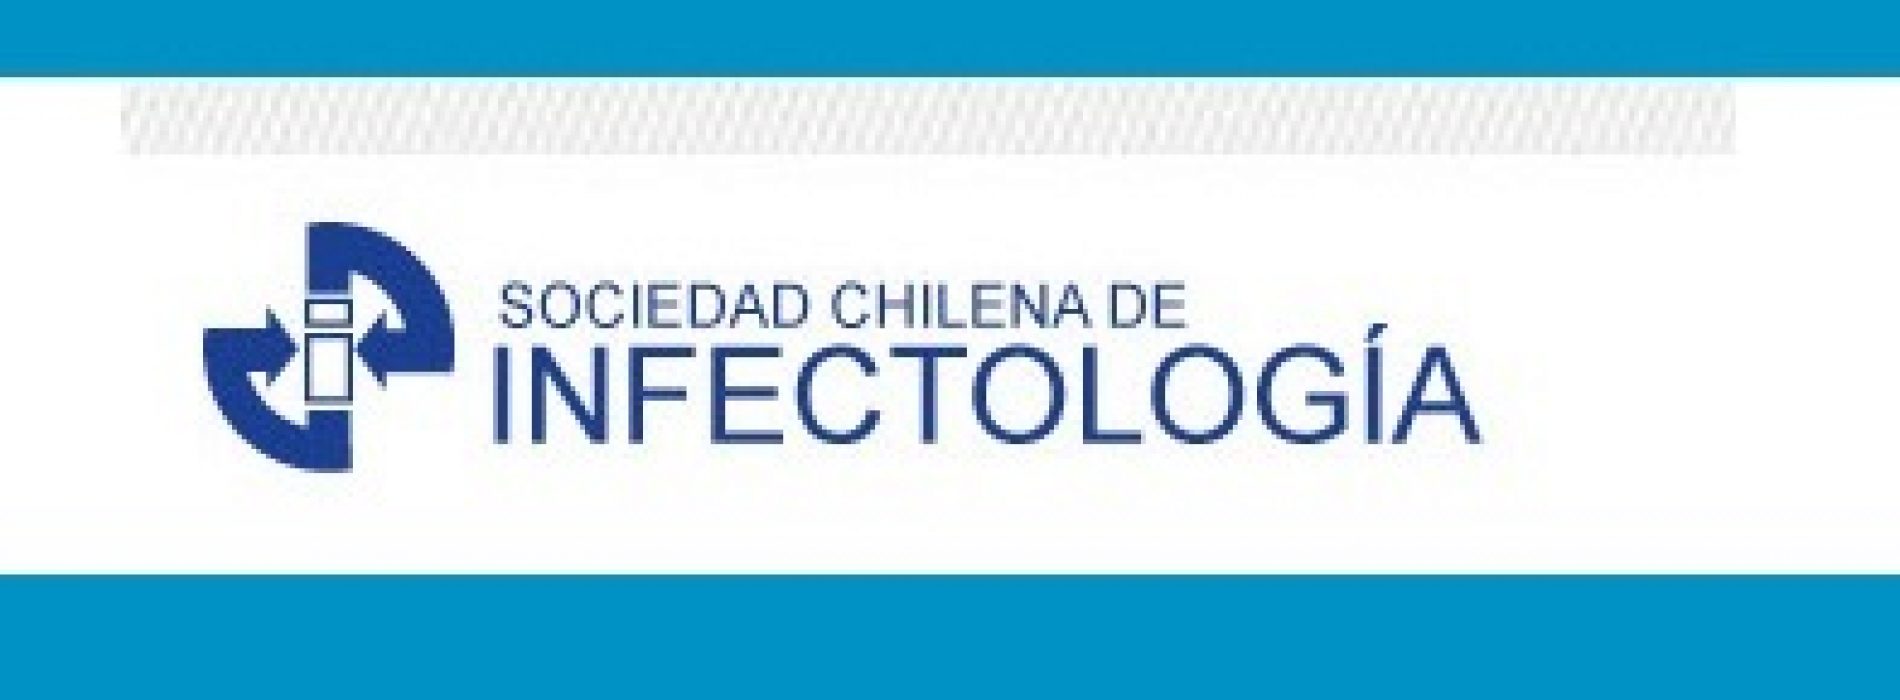 Course of Clinical Microbiology: "Update on microbiology"